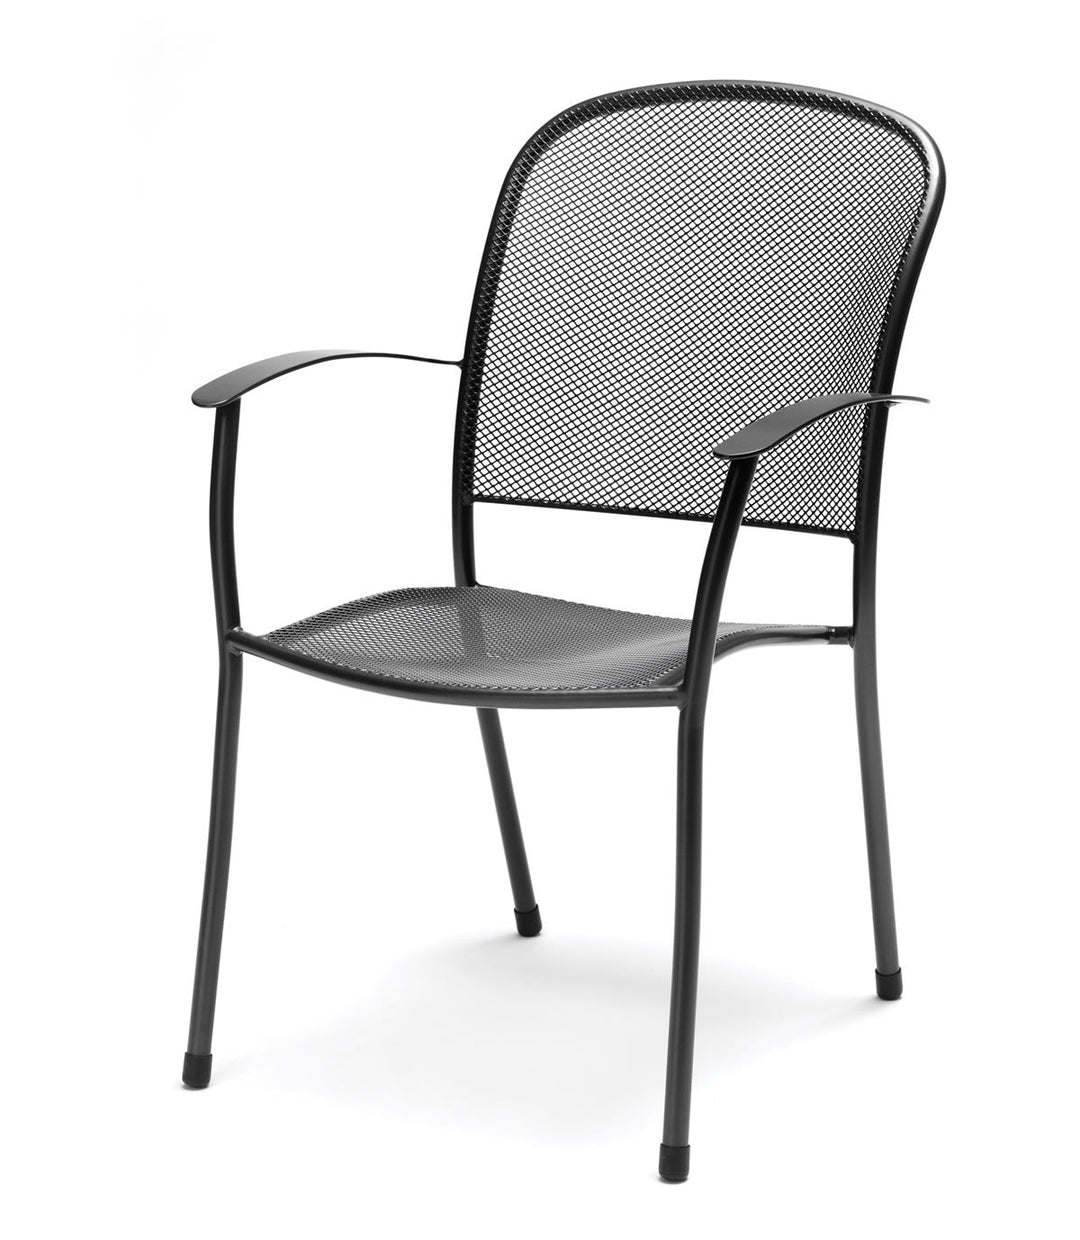 Wrought iron chair designed in germany high quality finish commercial use